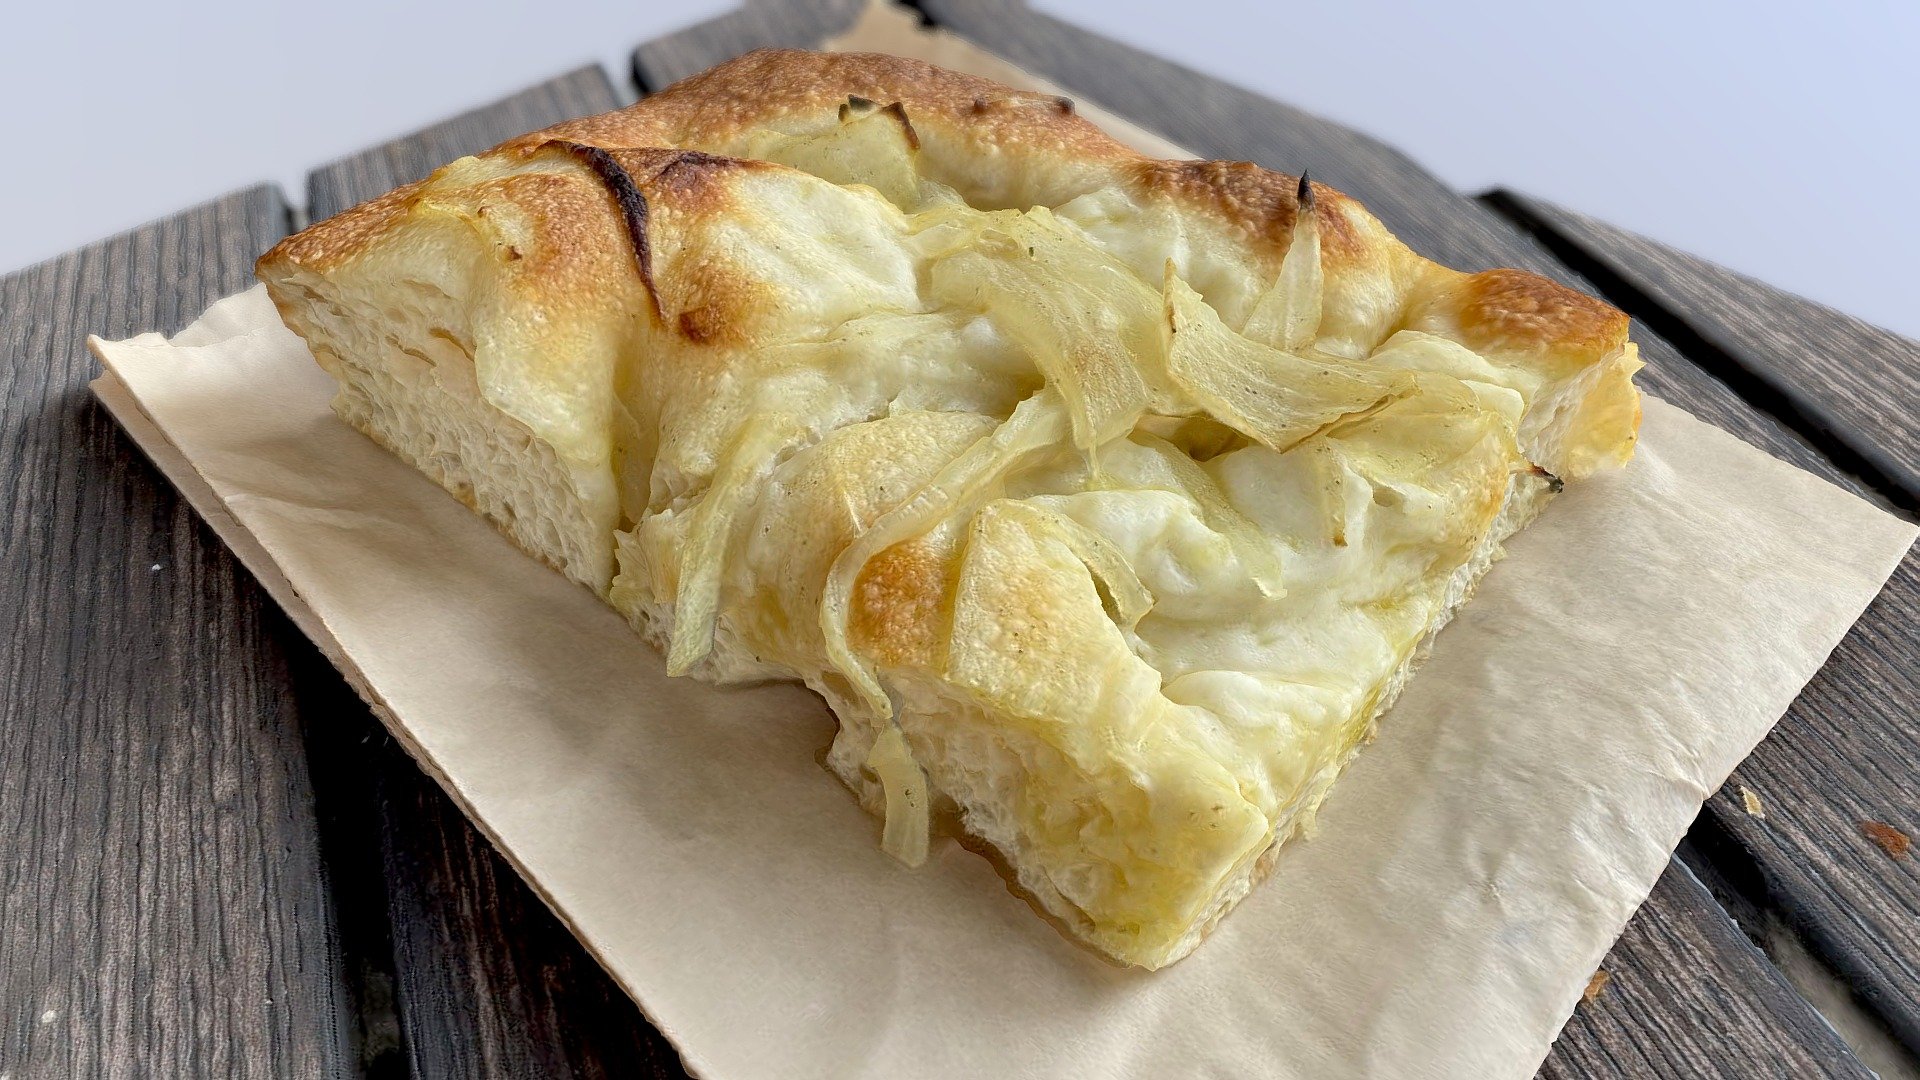 My favourite Focaccia with onion from Brooklyn, New York made by Saraghina Bakery.

433 Halsey St, Brooklyn, NY 11233, United States

https://www.saraghinabakery.com/

Ultra realistic food created by Augemented Reality Food - Zoltanfood 3d model